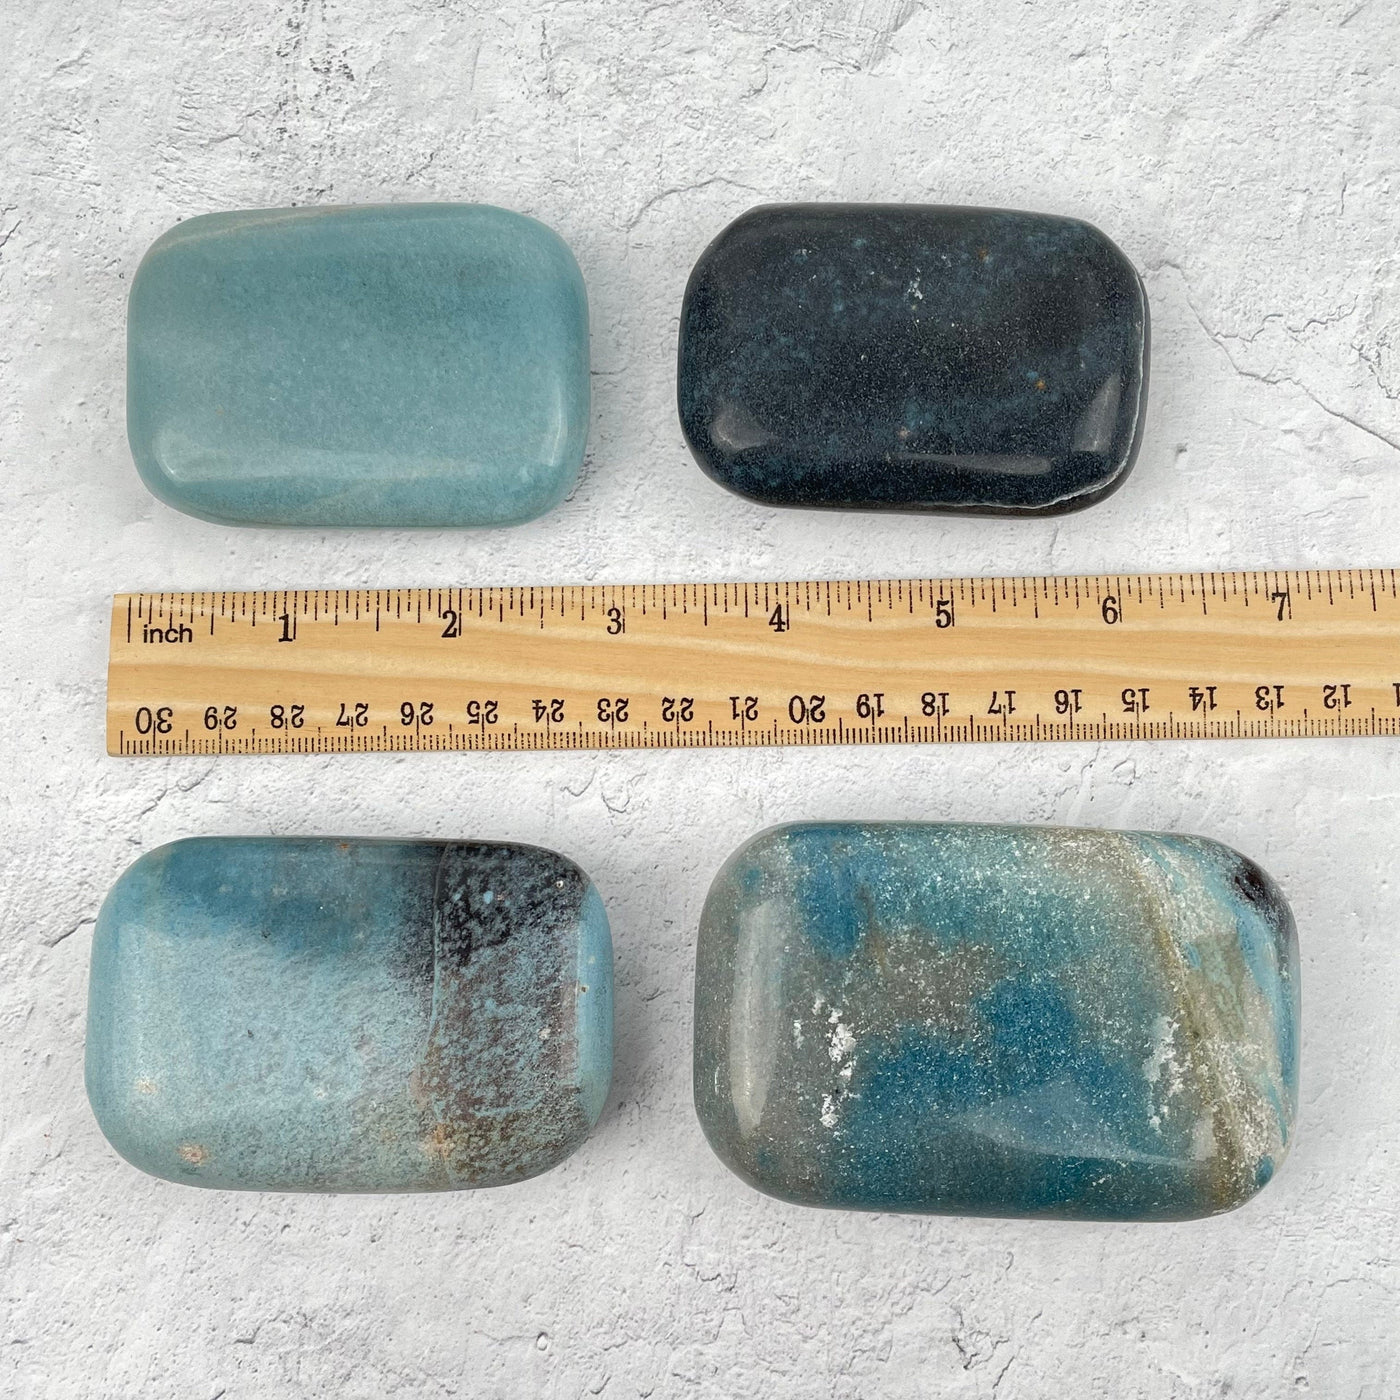 Trolleite Palm Stone - Worry Stone next to a ruler for size reference 